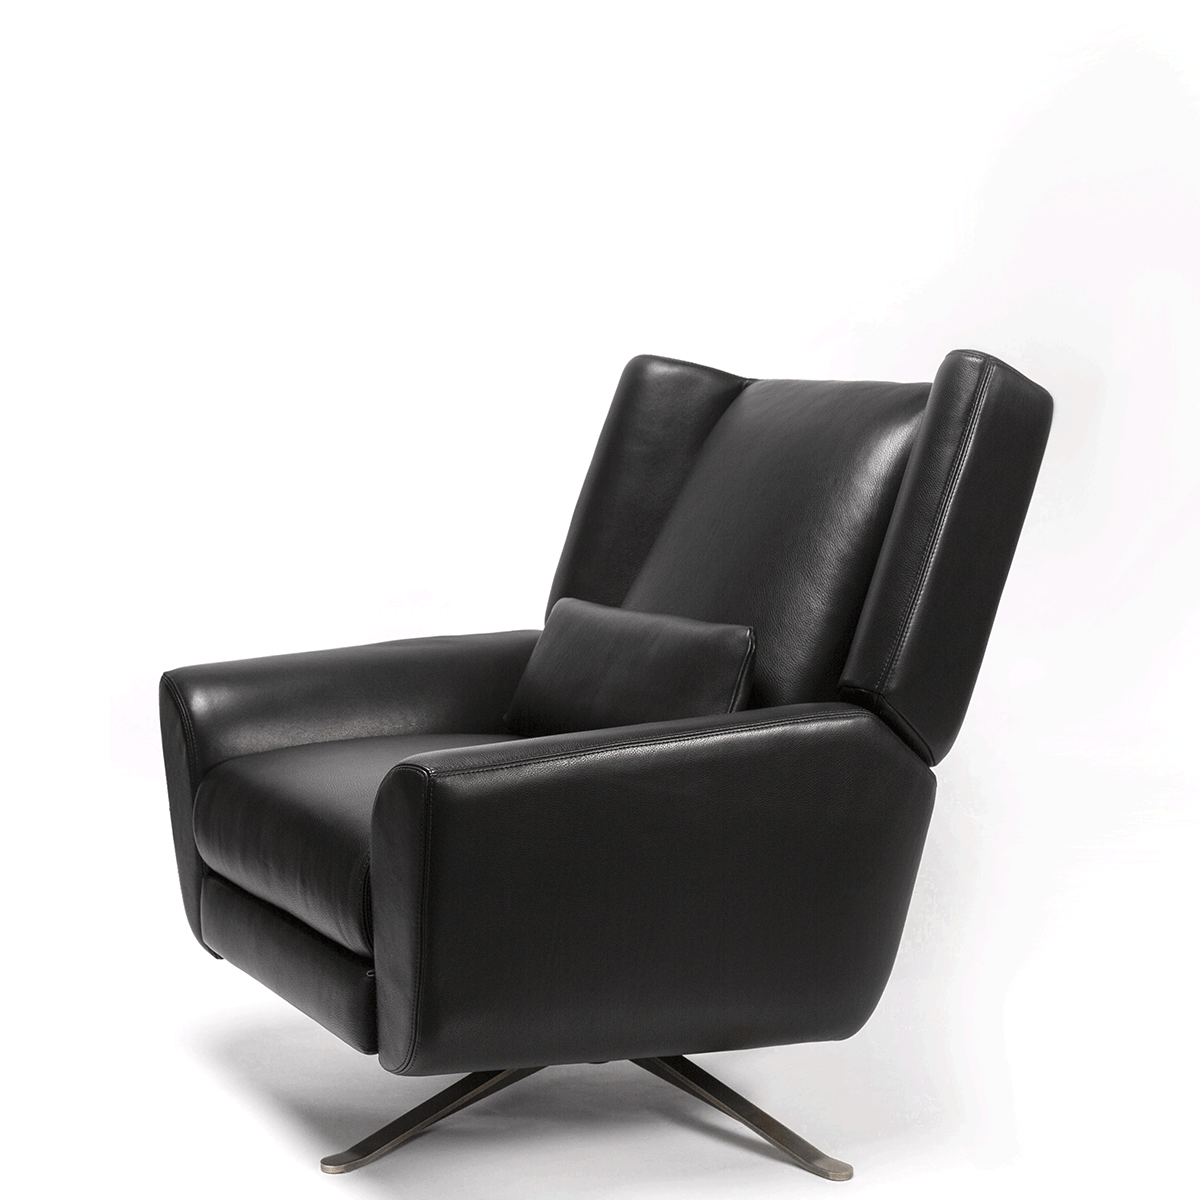 Why billionaires can't get enough of these £65,000 leather chairs